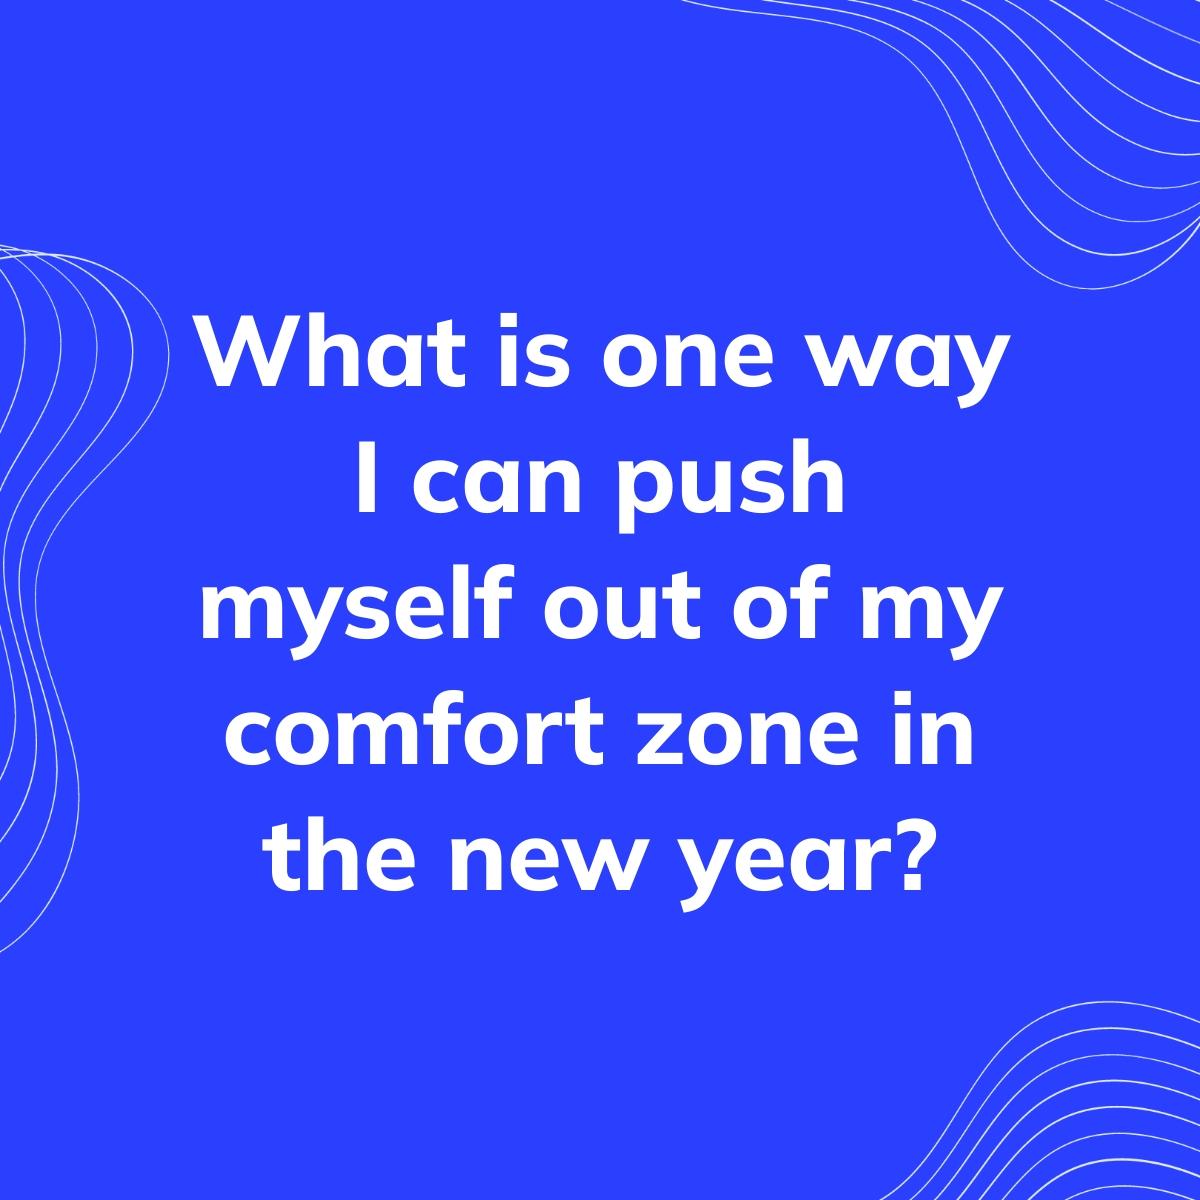 Journal Prompt: What is one way I can push myself out of my comfort zone in the new year?